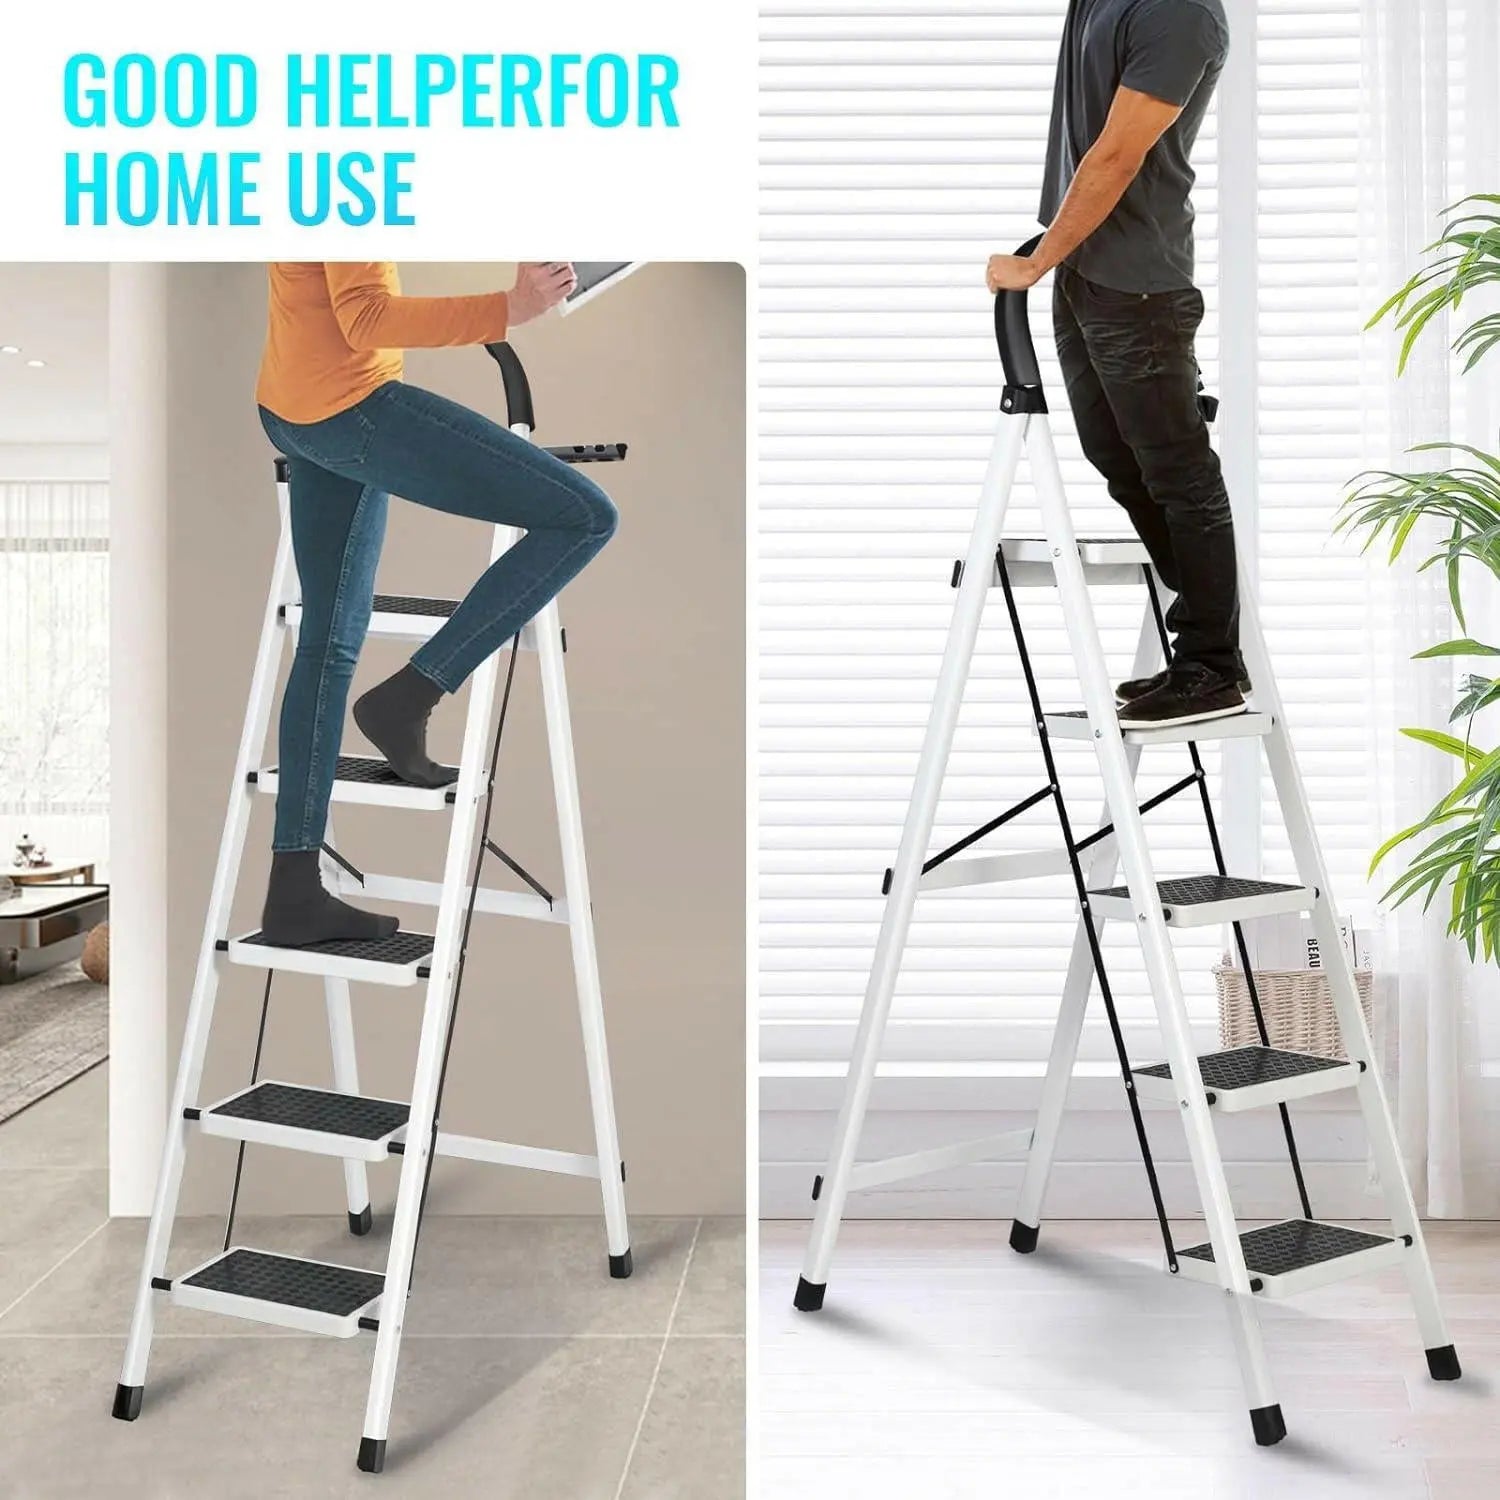 SKY-TOUCH Foldable Ladder 5 Steps, Home Ladder Folding Step Stool with Wide Anti-Slip Pedal, Adults Folding Sturdy Steel Ladder for Home,Kitchen